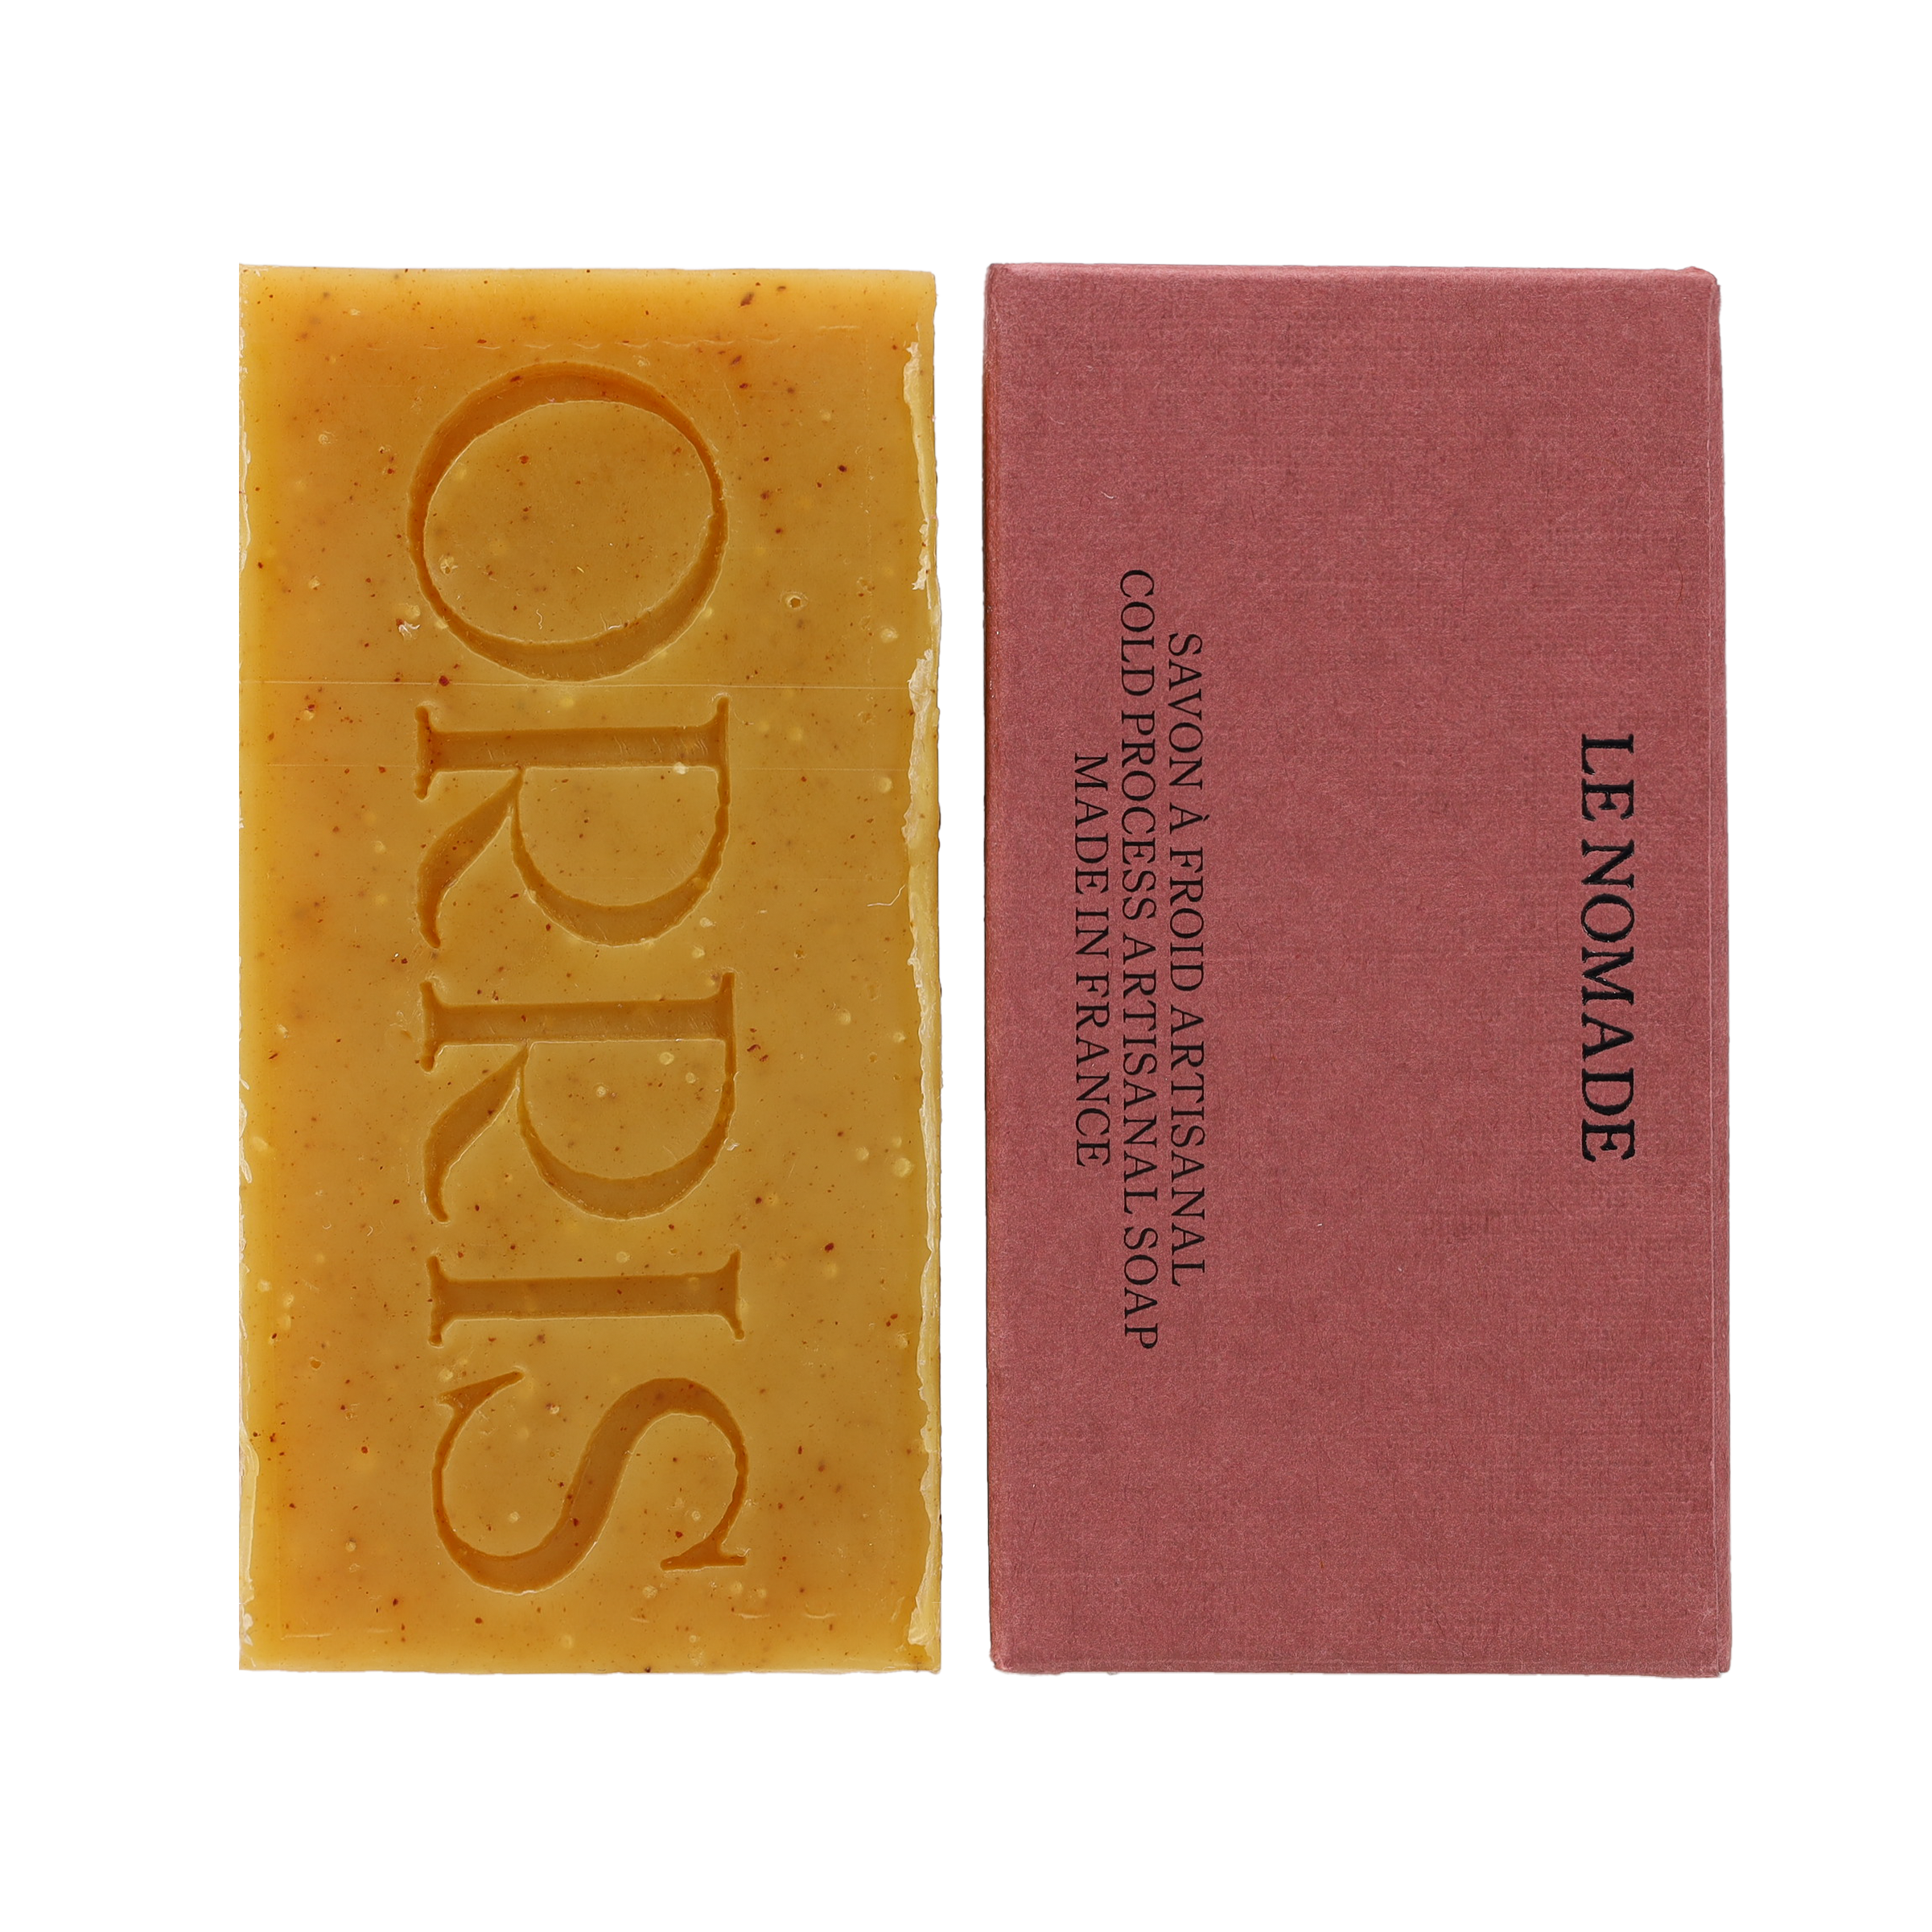 
  
  ORRIS LE NOMADE Botanical Face + Body Cleansing Bar- LORDE beauty and cosmetics
  
